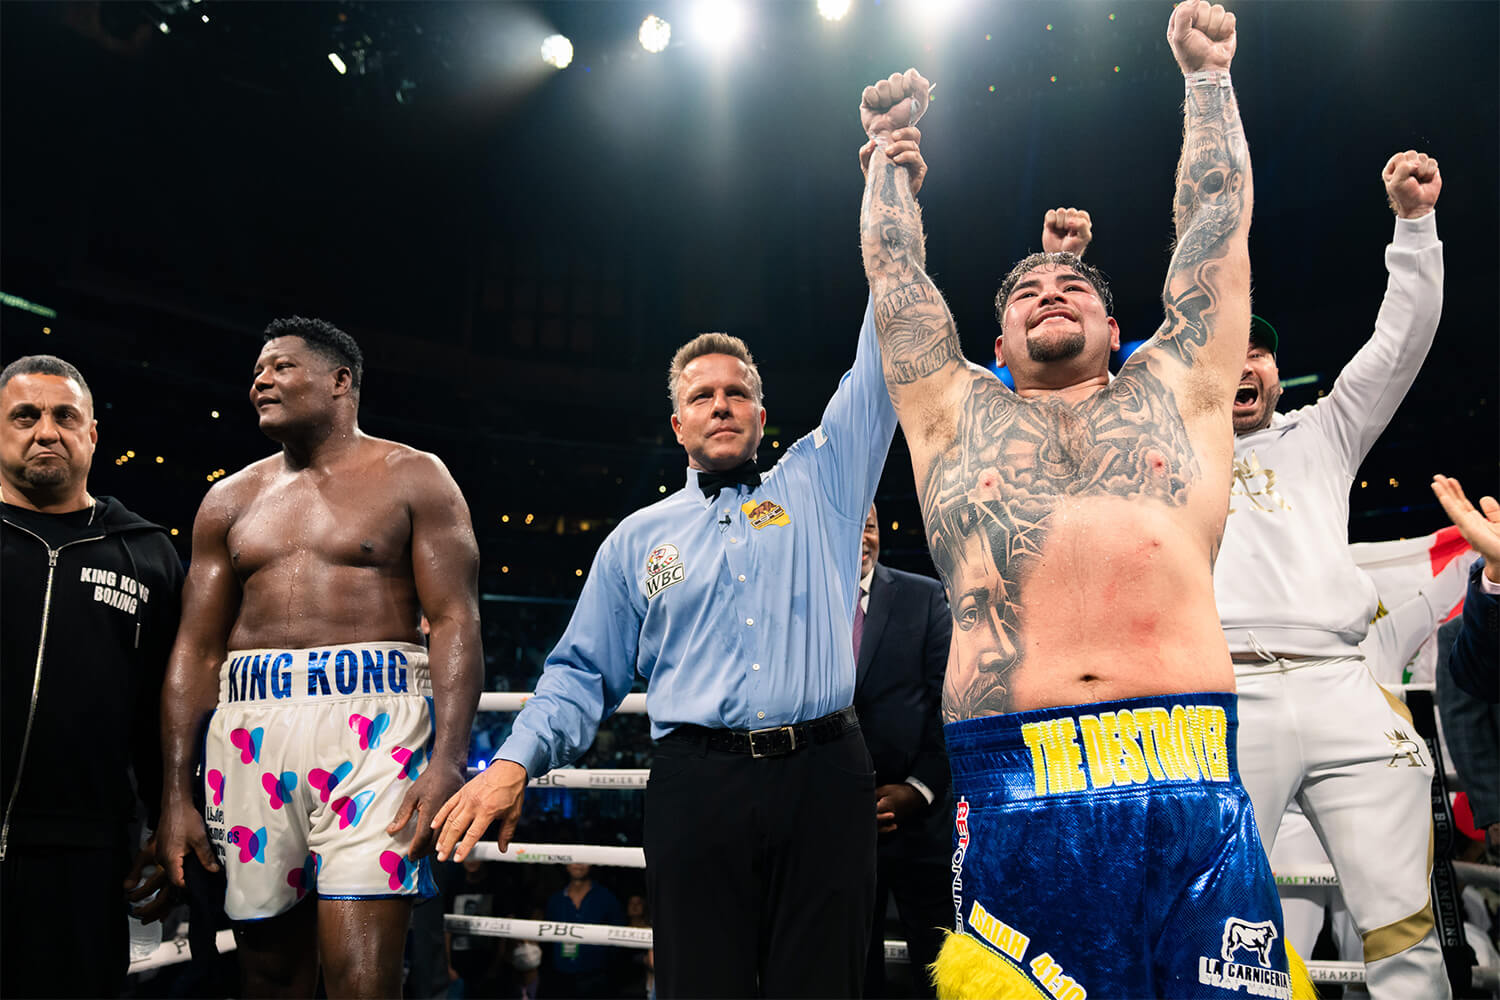 ANDY RUIZ JR. DROPS LUIS ORTIZ THREE TIMES ON HIS WAY TO DECISION VICTORY